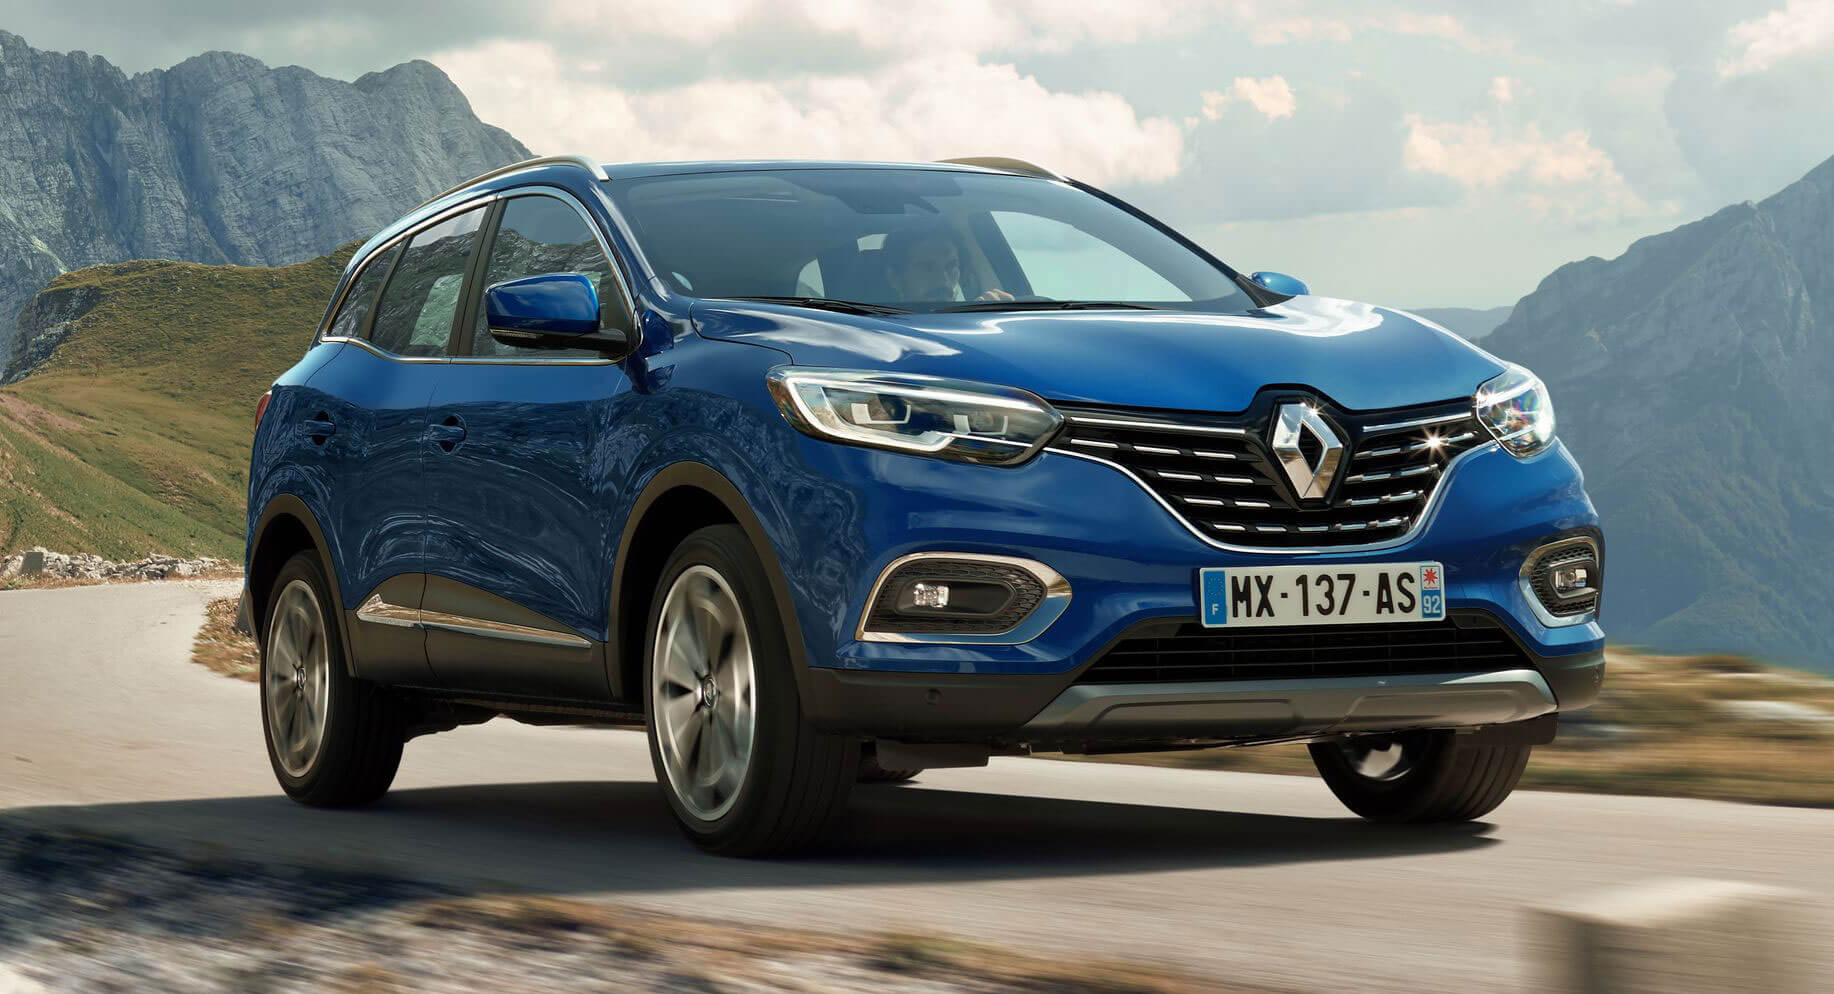 Facelifted Renault Kadjar Debuts With Updated Styling, New